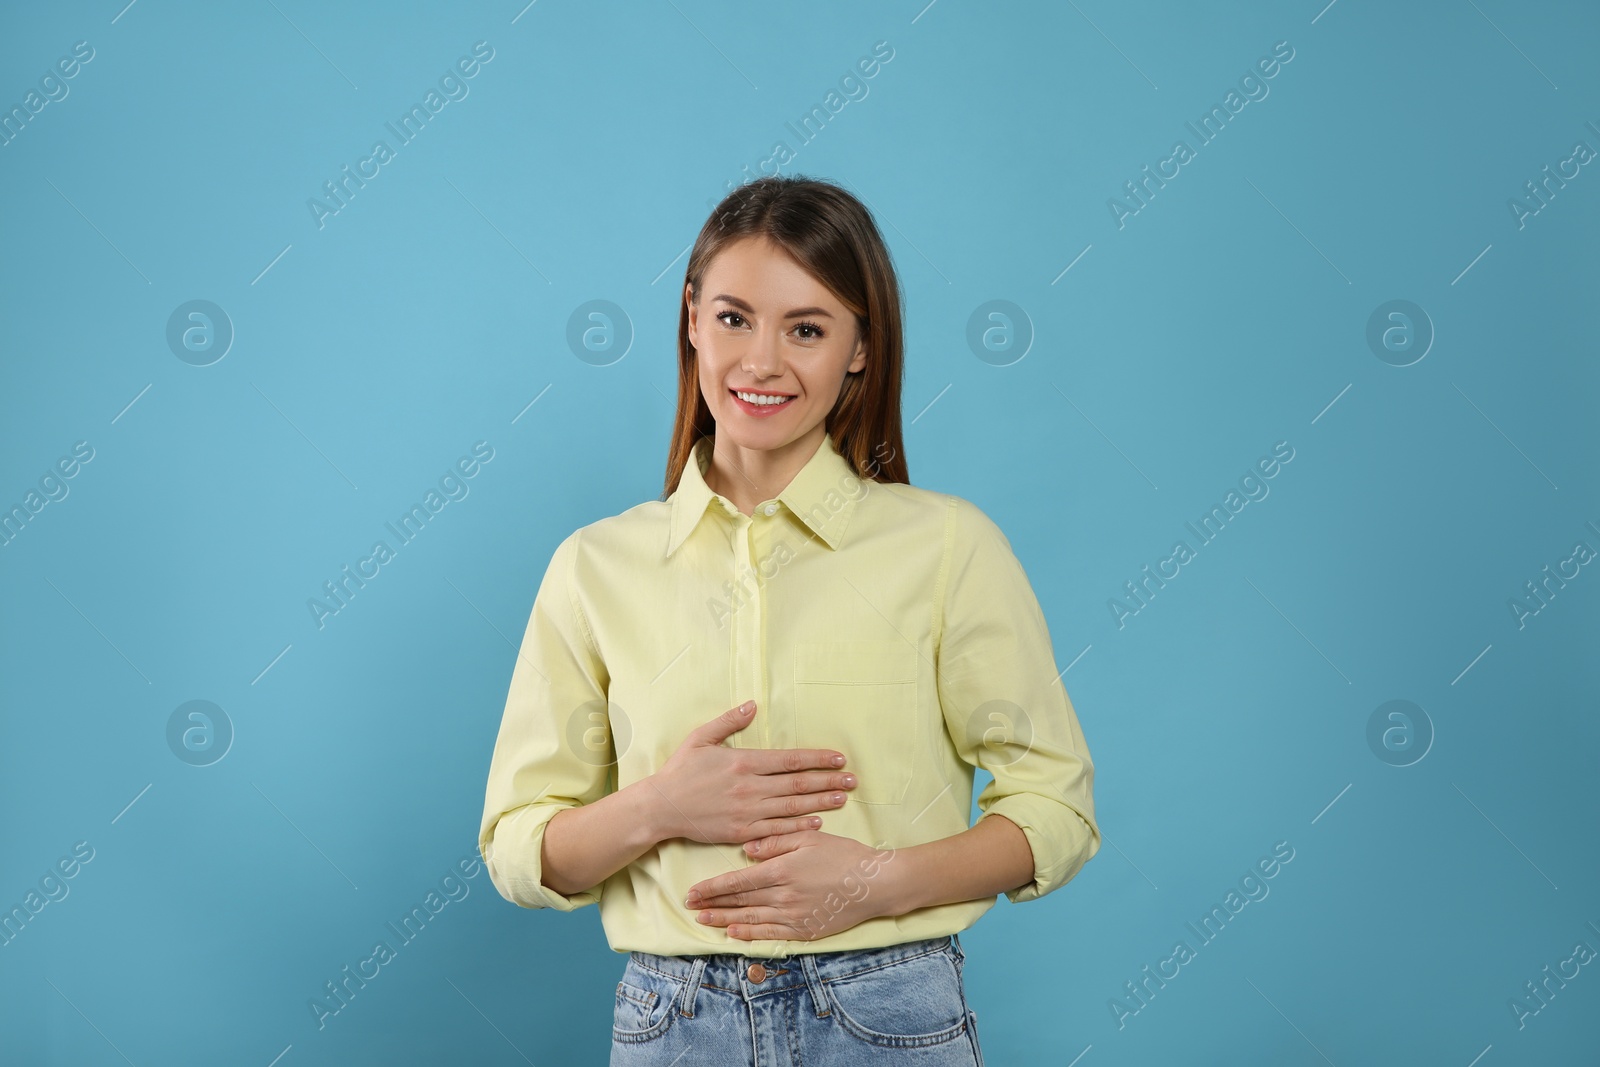 Photo of Healthy woman holding hands on belly against light blue background